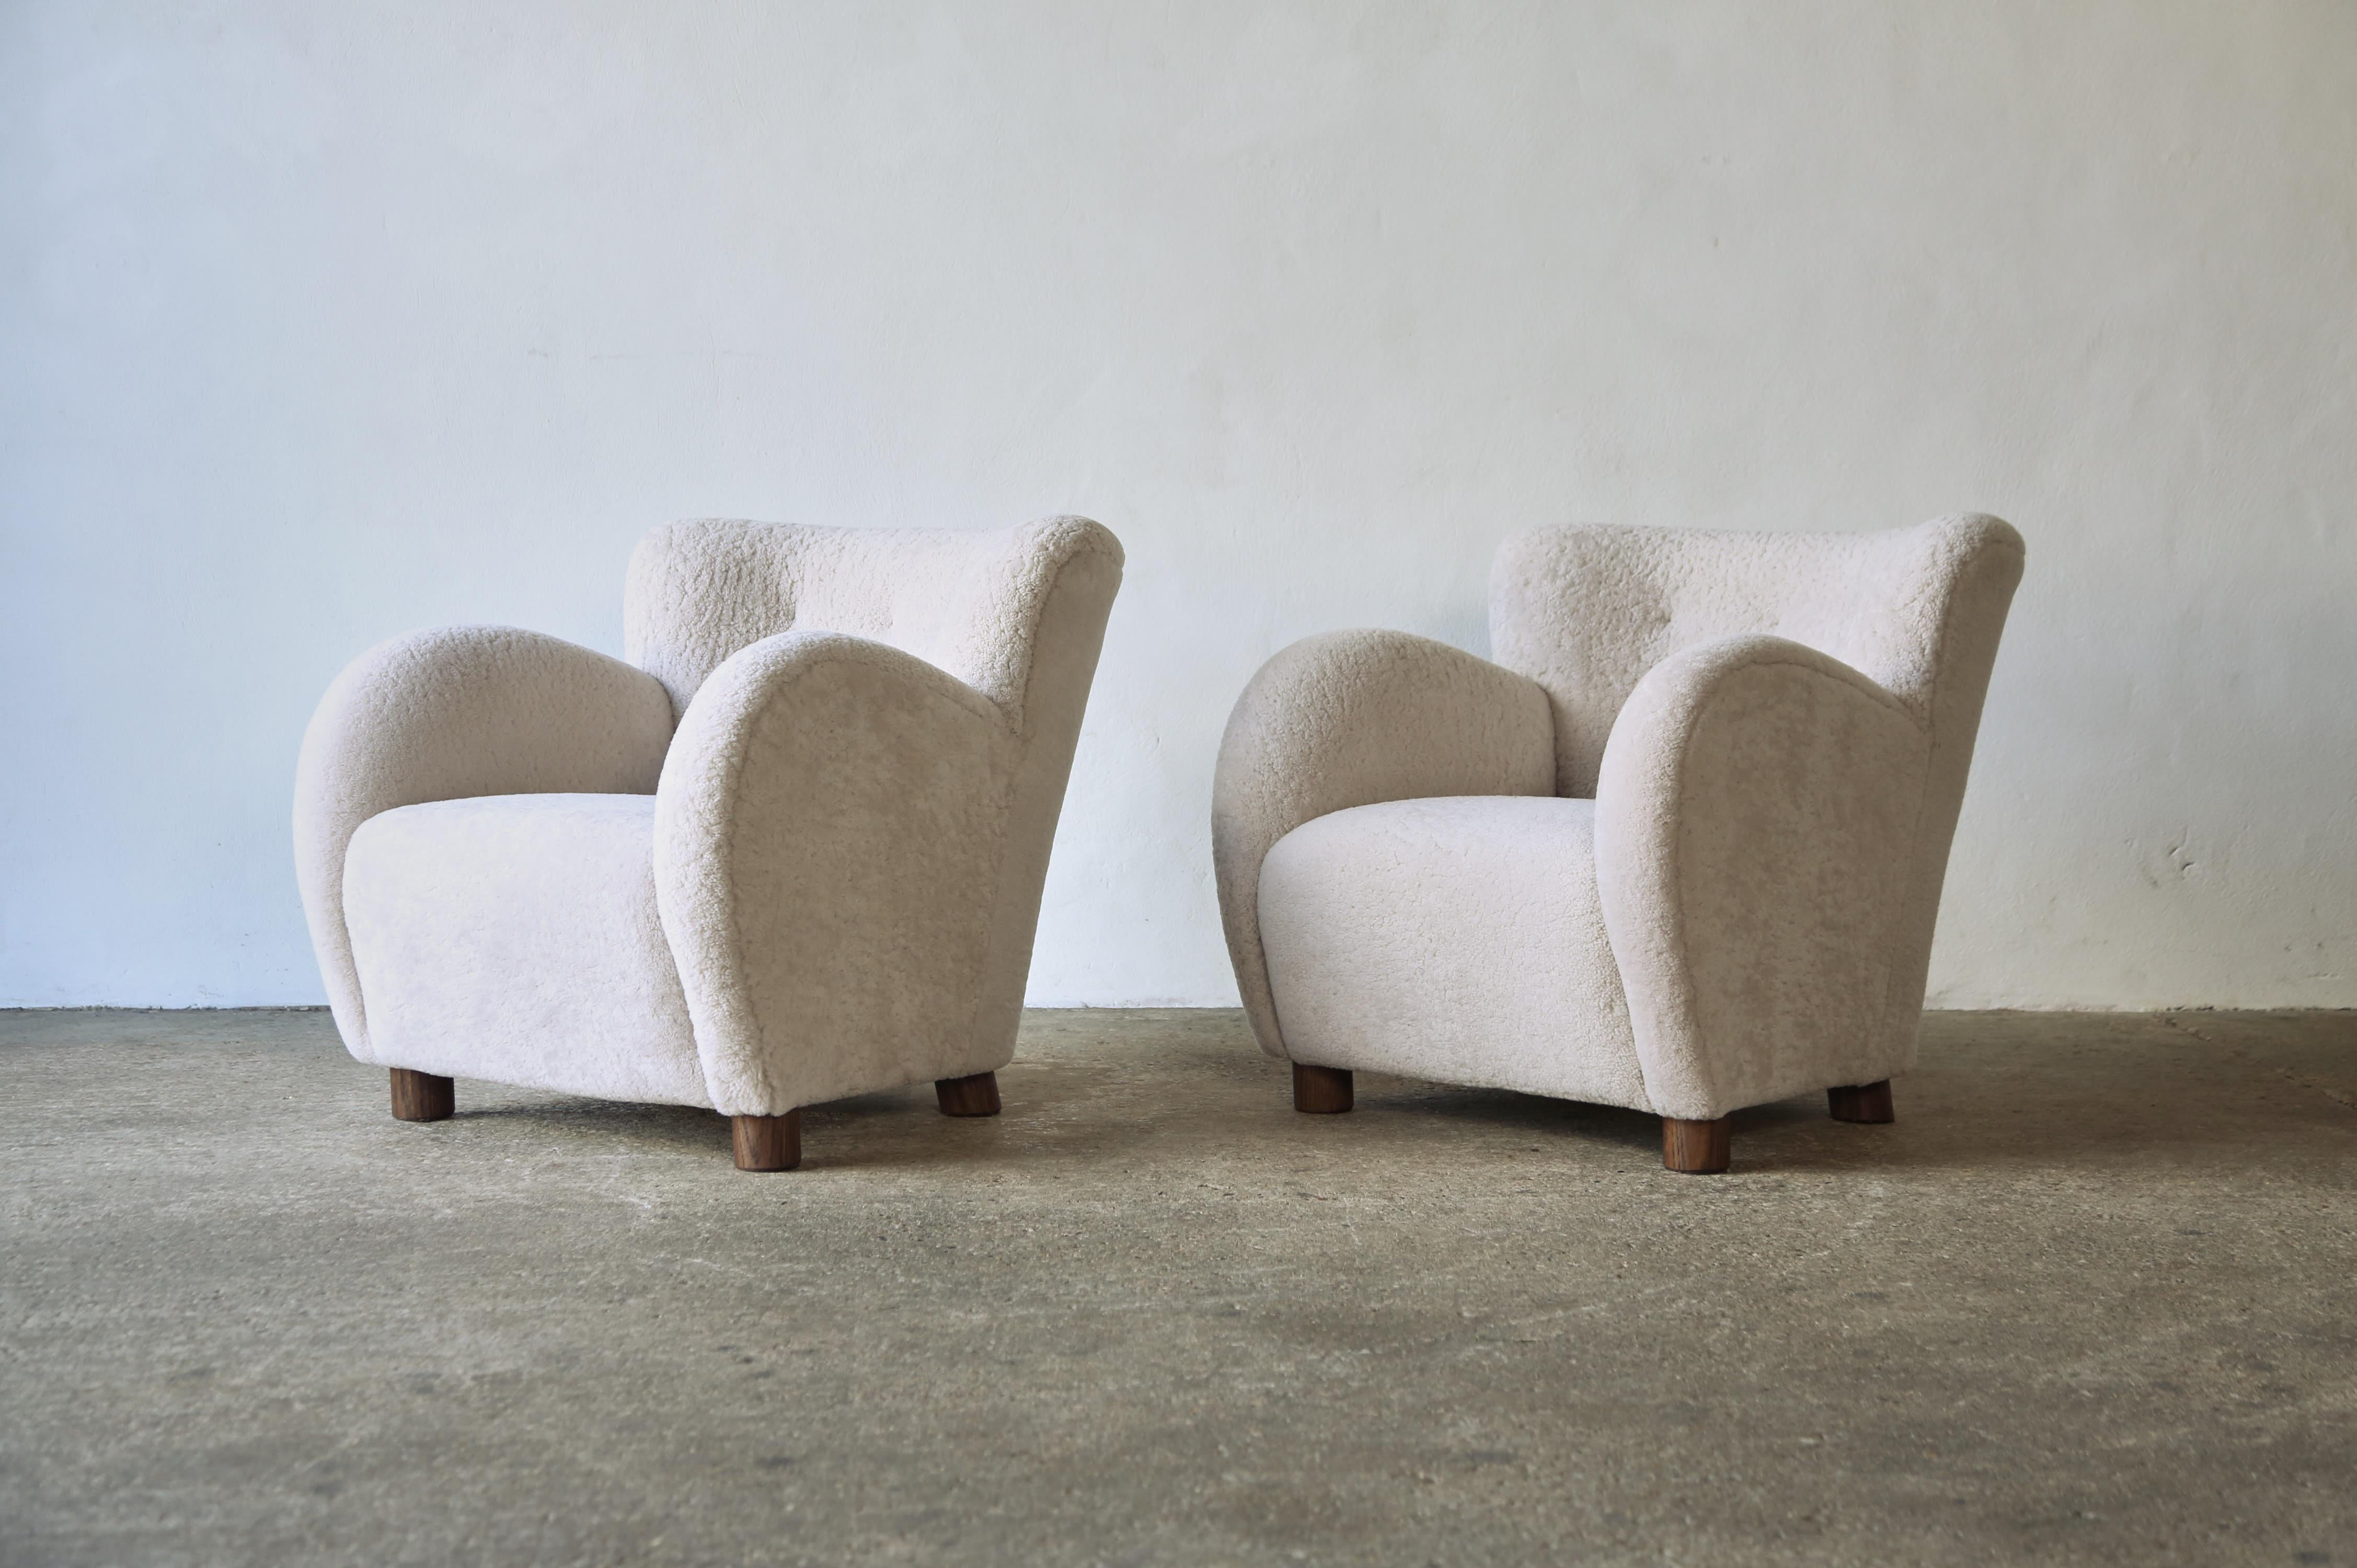 A superb pair of modern round-arm lounge chairs.  Handmade beech frames, sprung seats, with solid oak feet.  Newly upholstered in premium, soft, natural Australian sheepskin.  Fast shipping worldwide.


